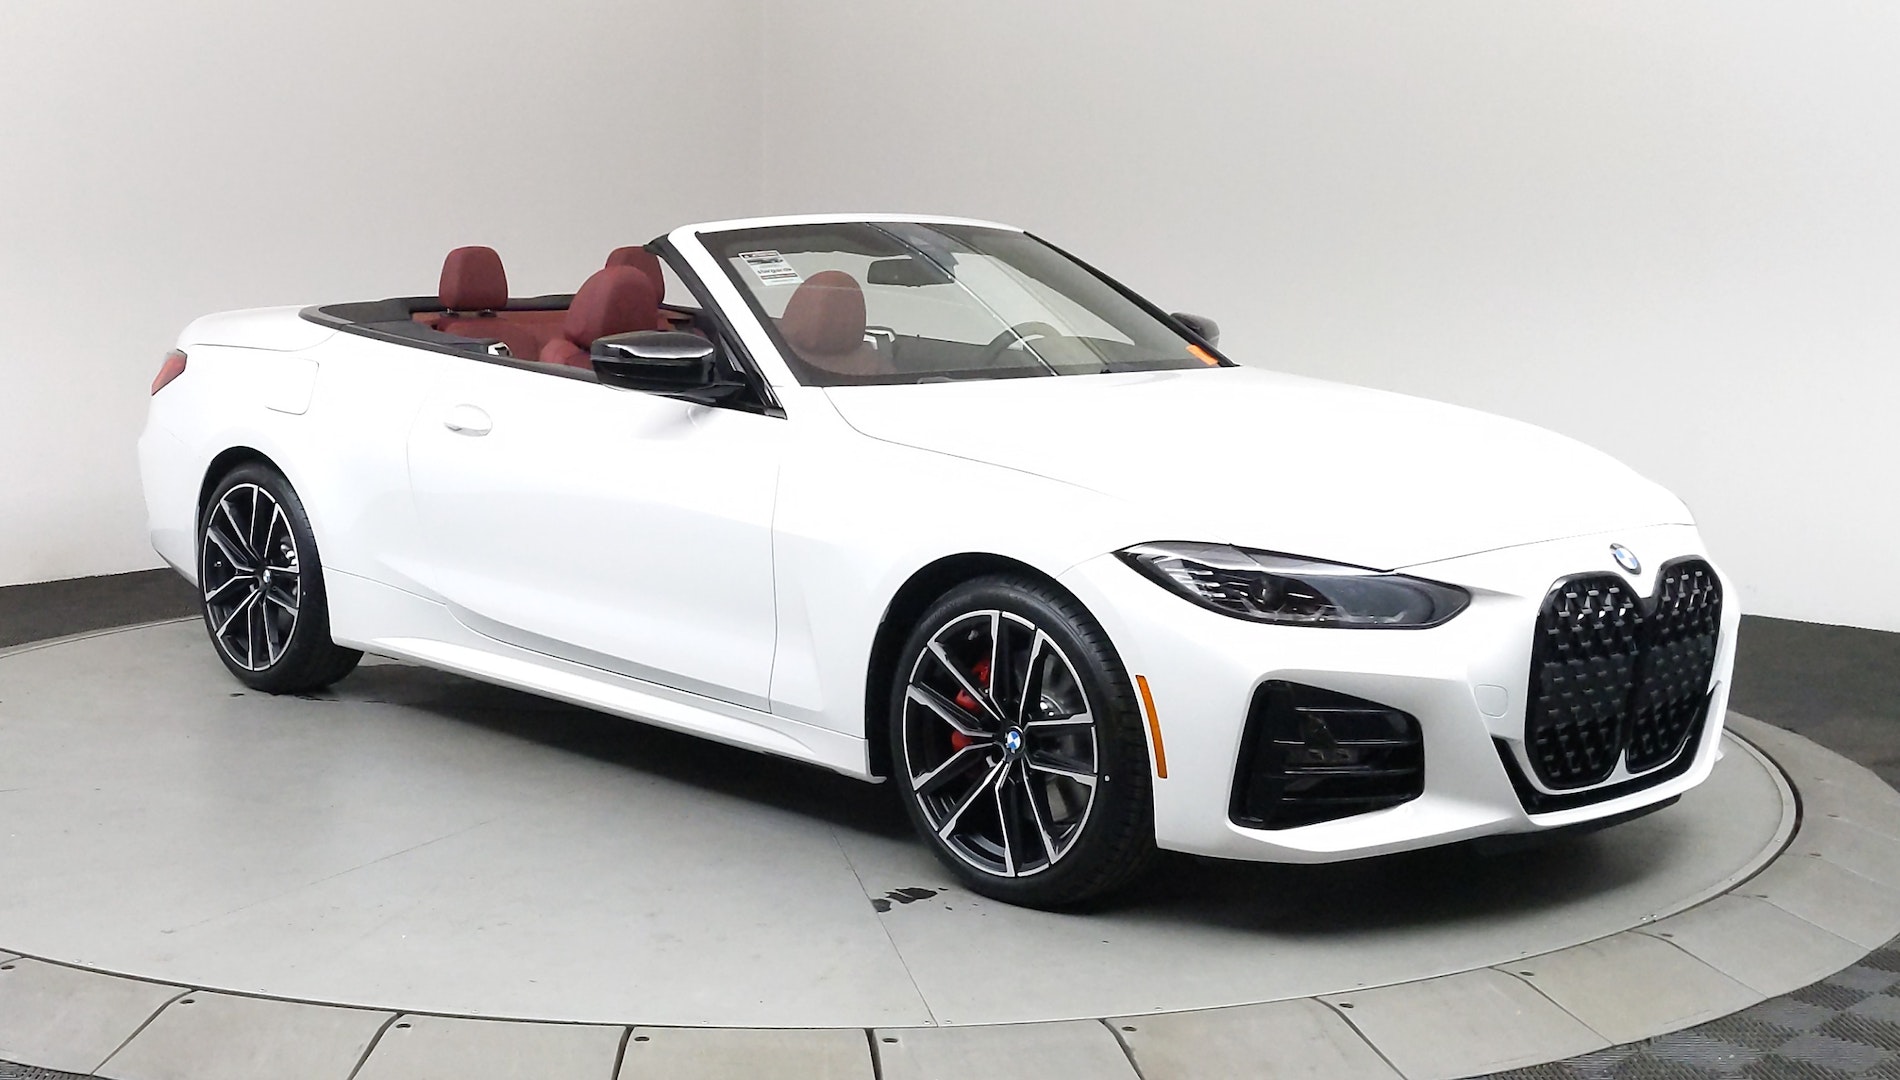 New 2023 BMW 4 Series Coupe in Beaverton #PCL73608 | Kuni BMW